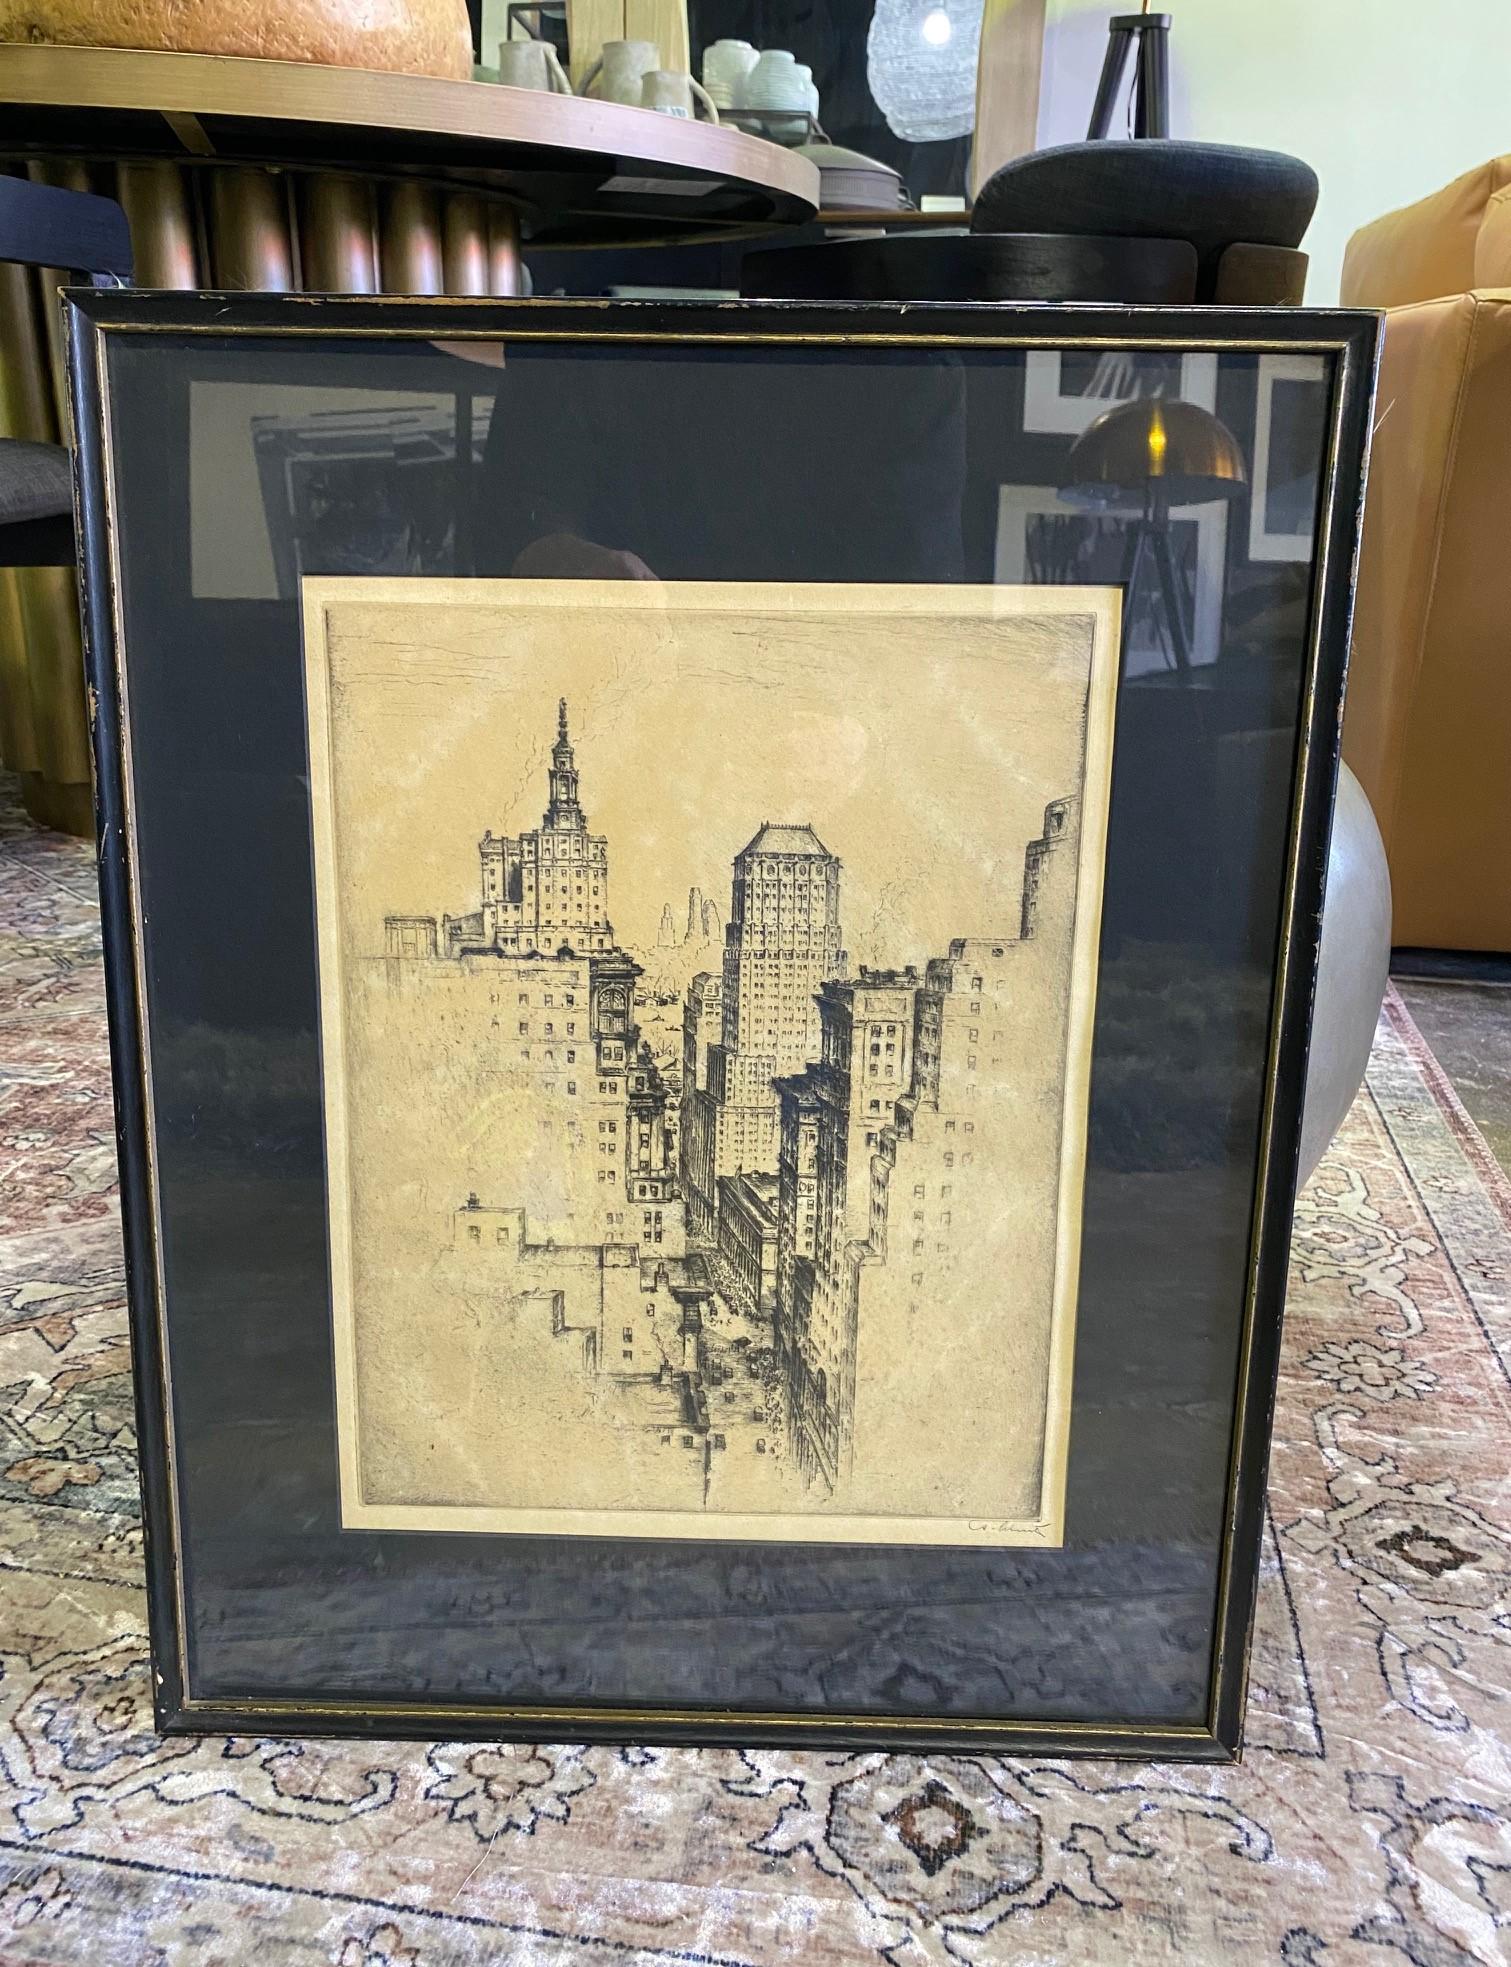 A wonderful, attractive, and striking image of the New York City skyline and towering classic buildings by German artist Anton Schutz.  Schutz was commissioned by The New York Times to make etchings of New York and other American cities.

Signed by